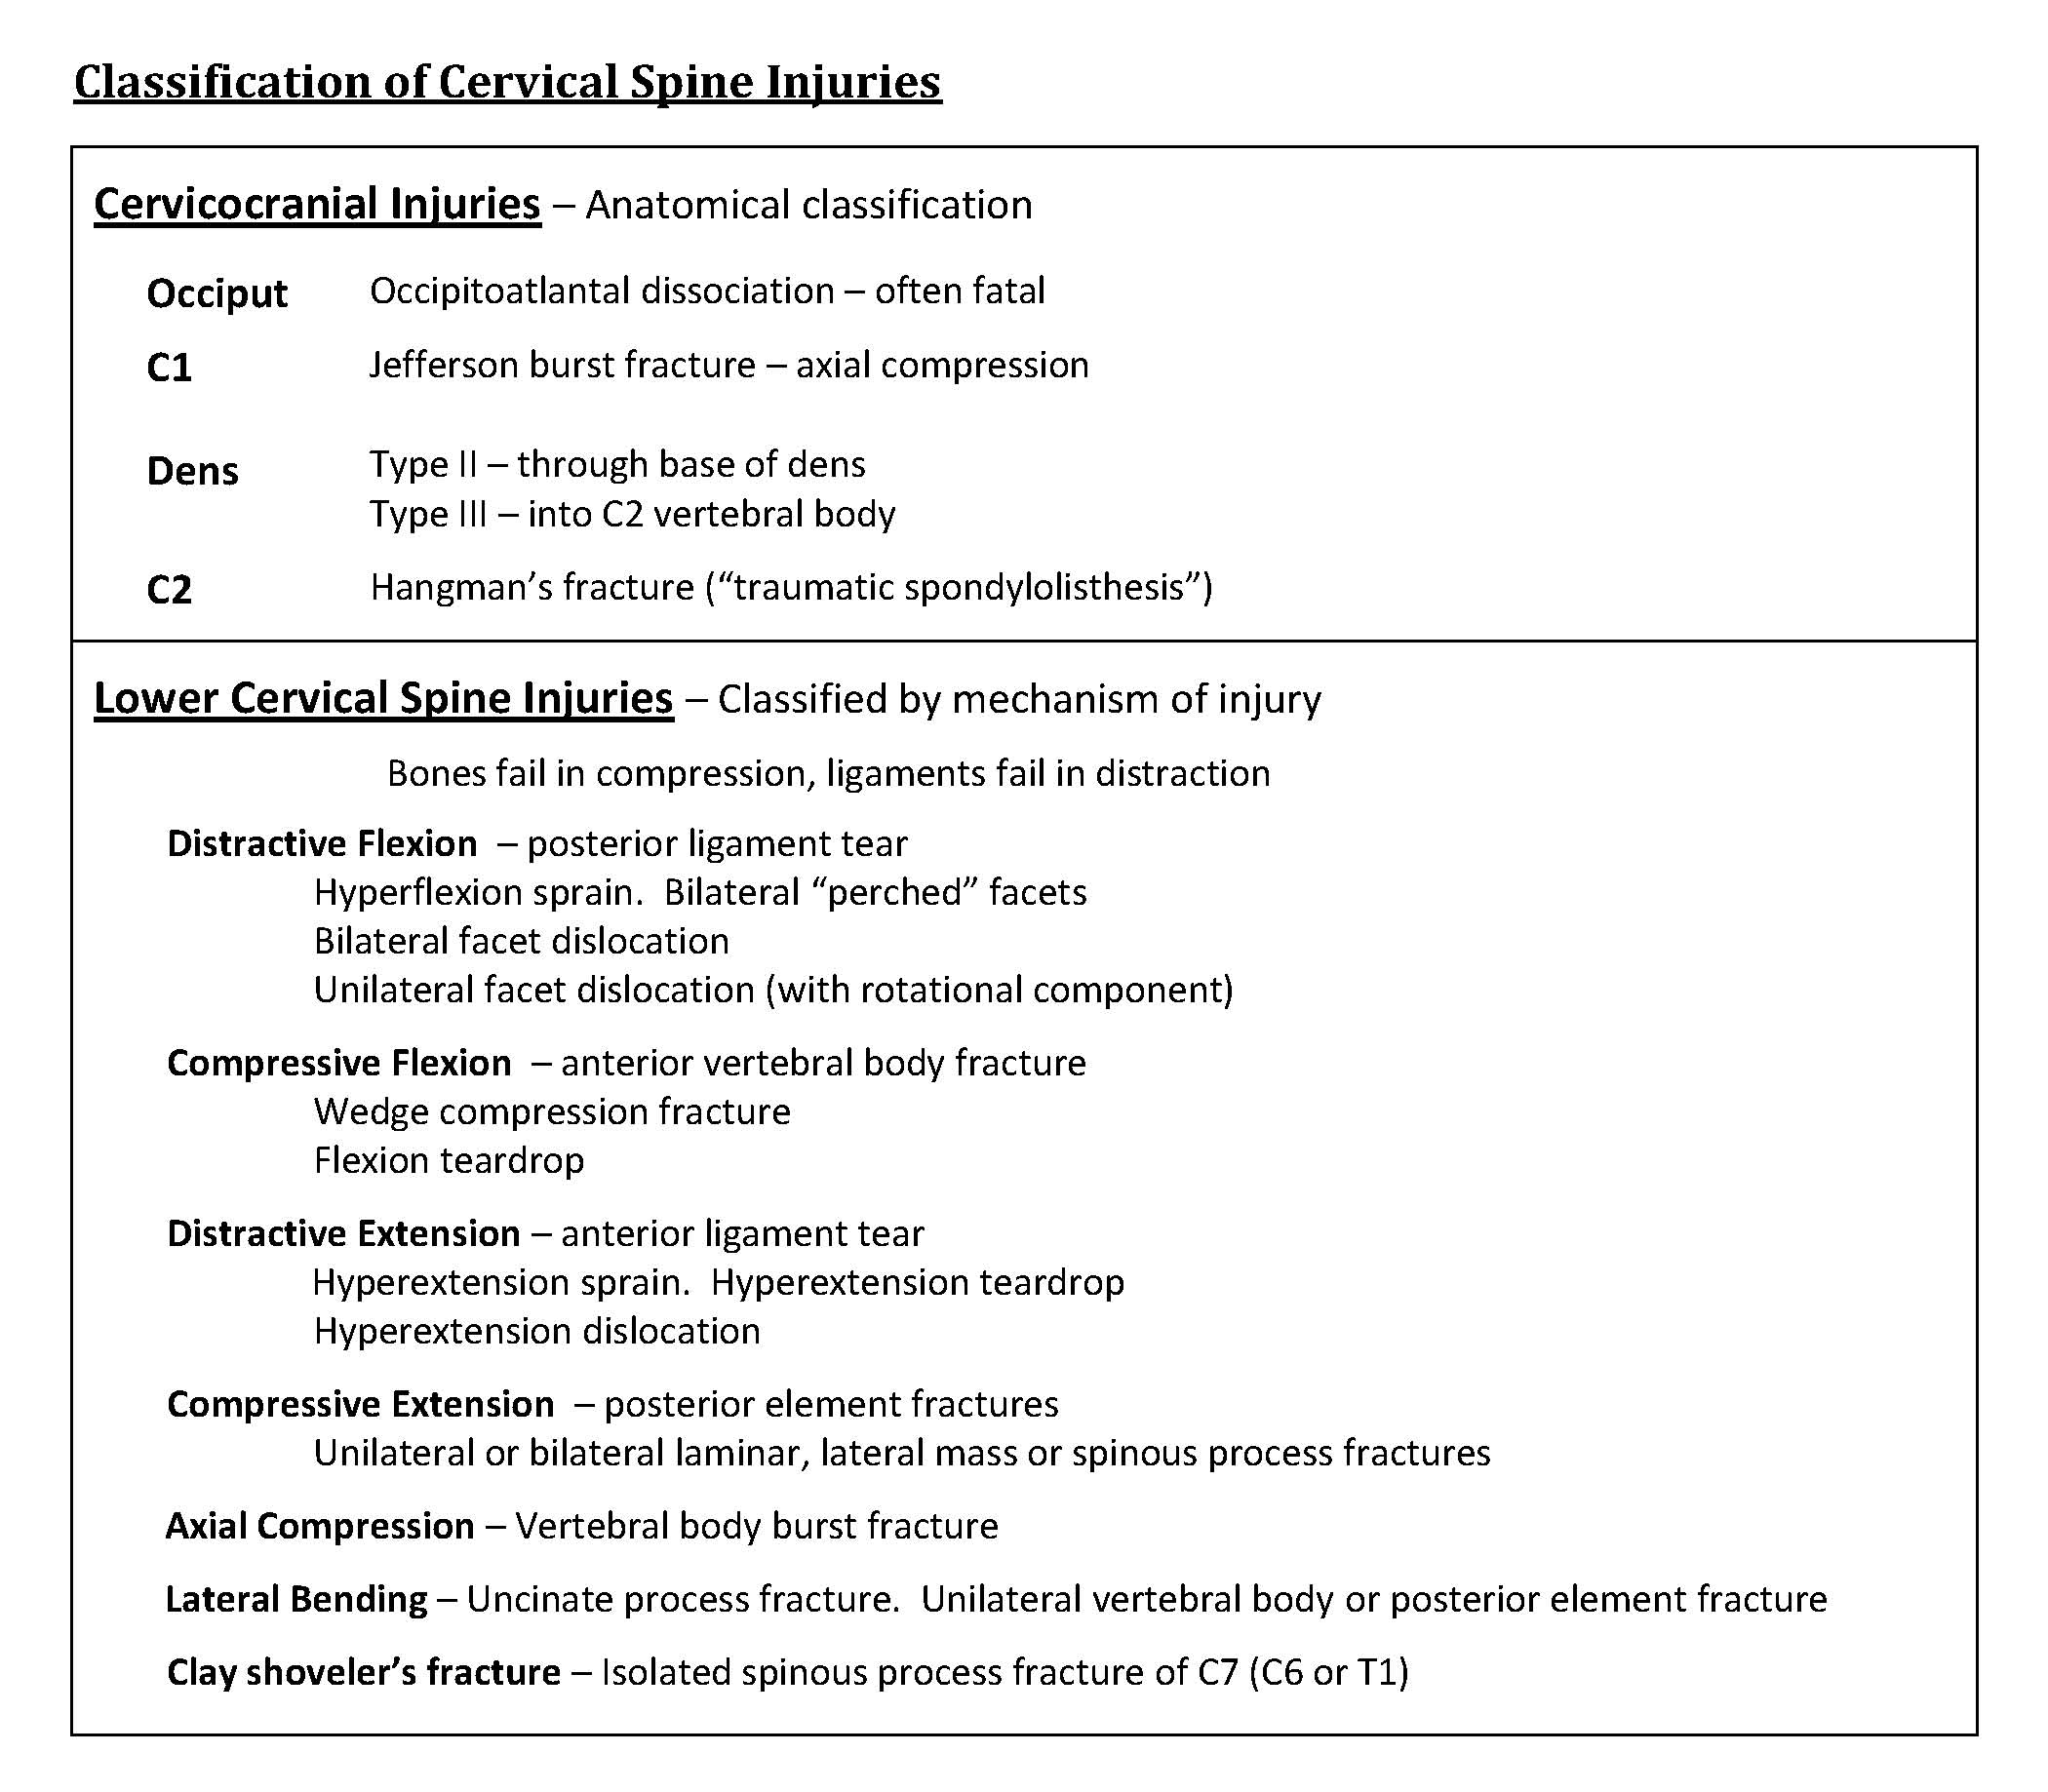 C-Spine Injuries Table